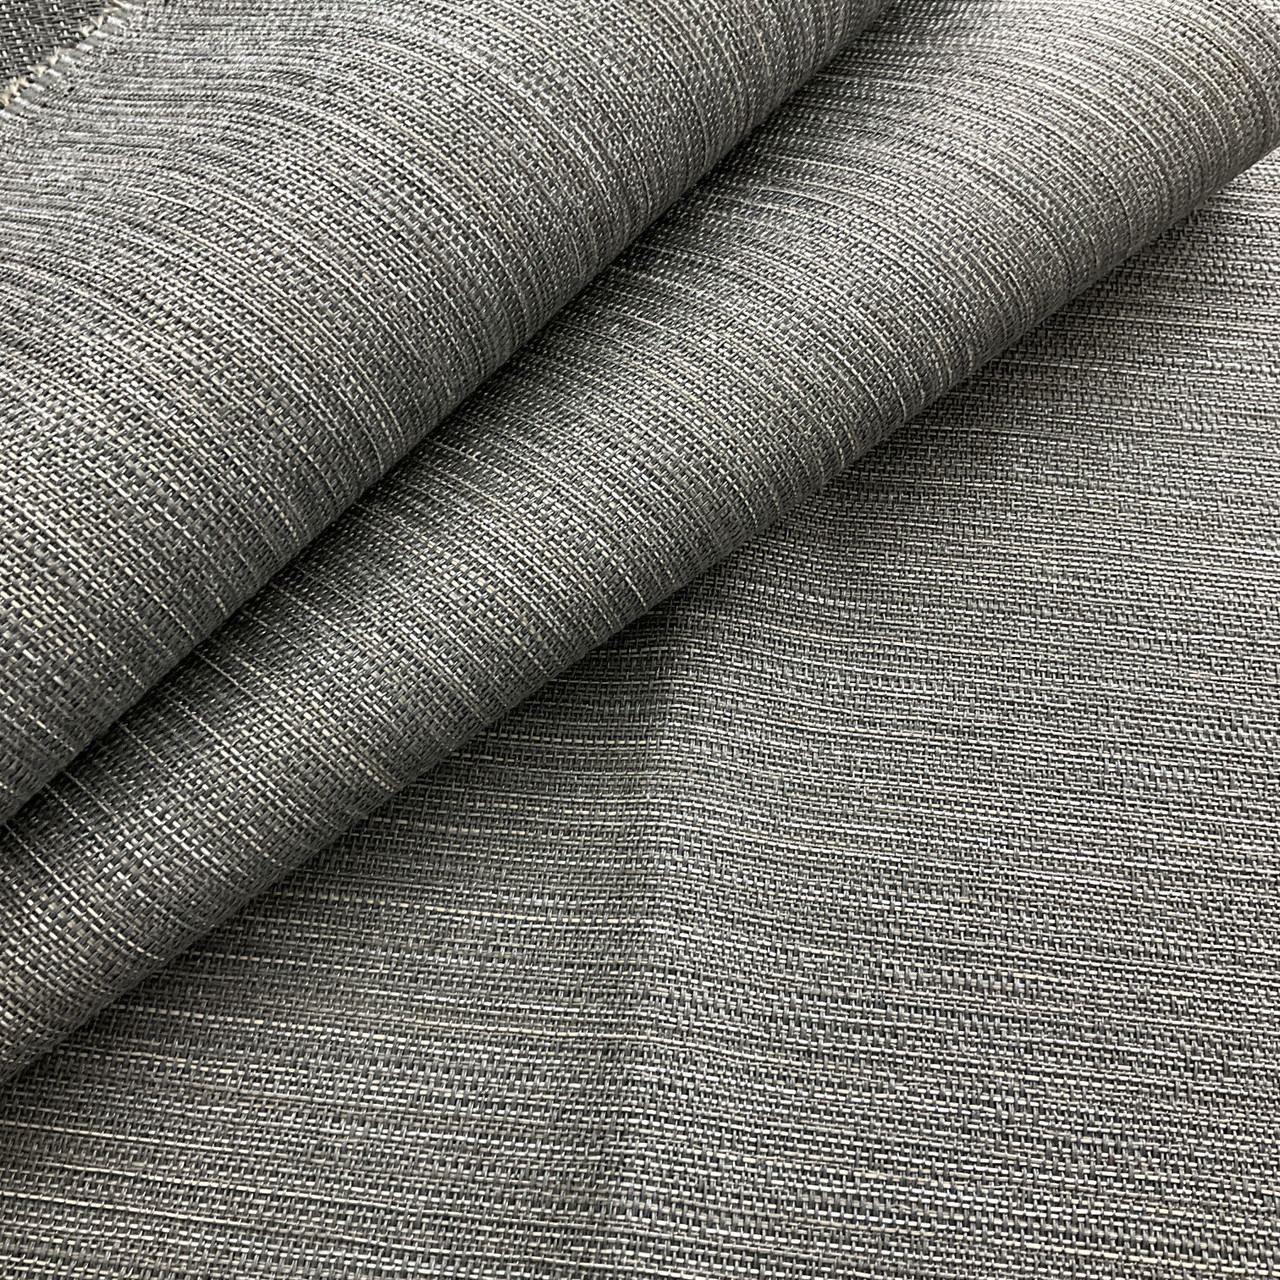 Buy Sunbrella Linen Stone 8319-0000 Elements Collection Upholstery Fabric  by the Yard